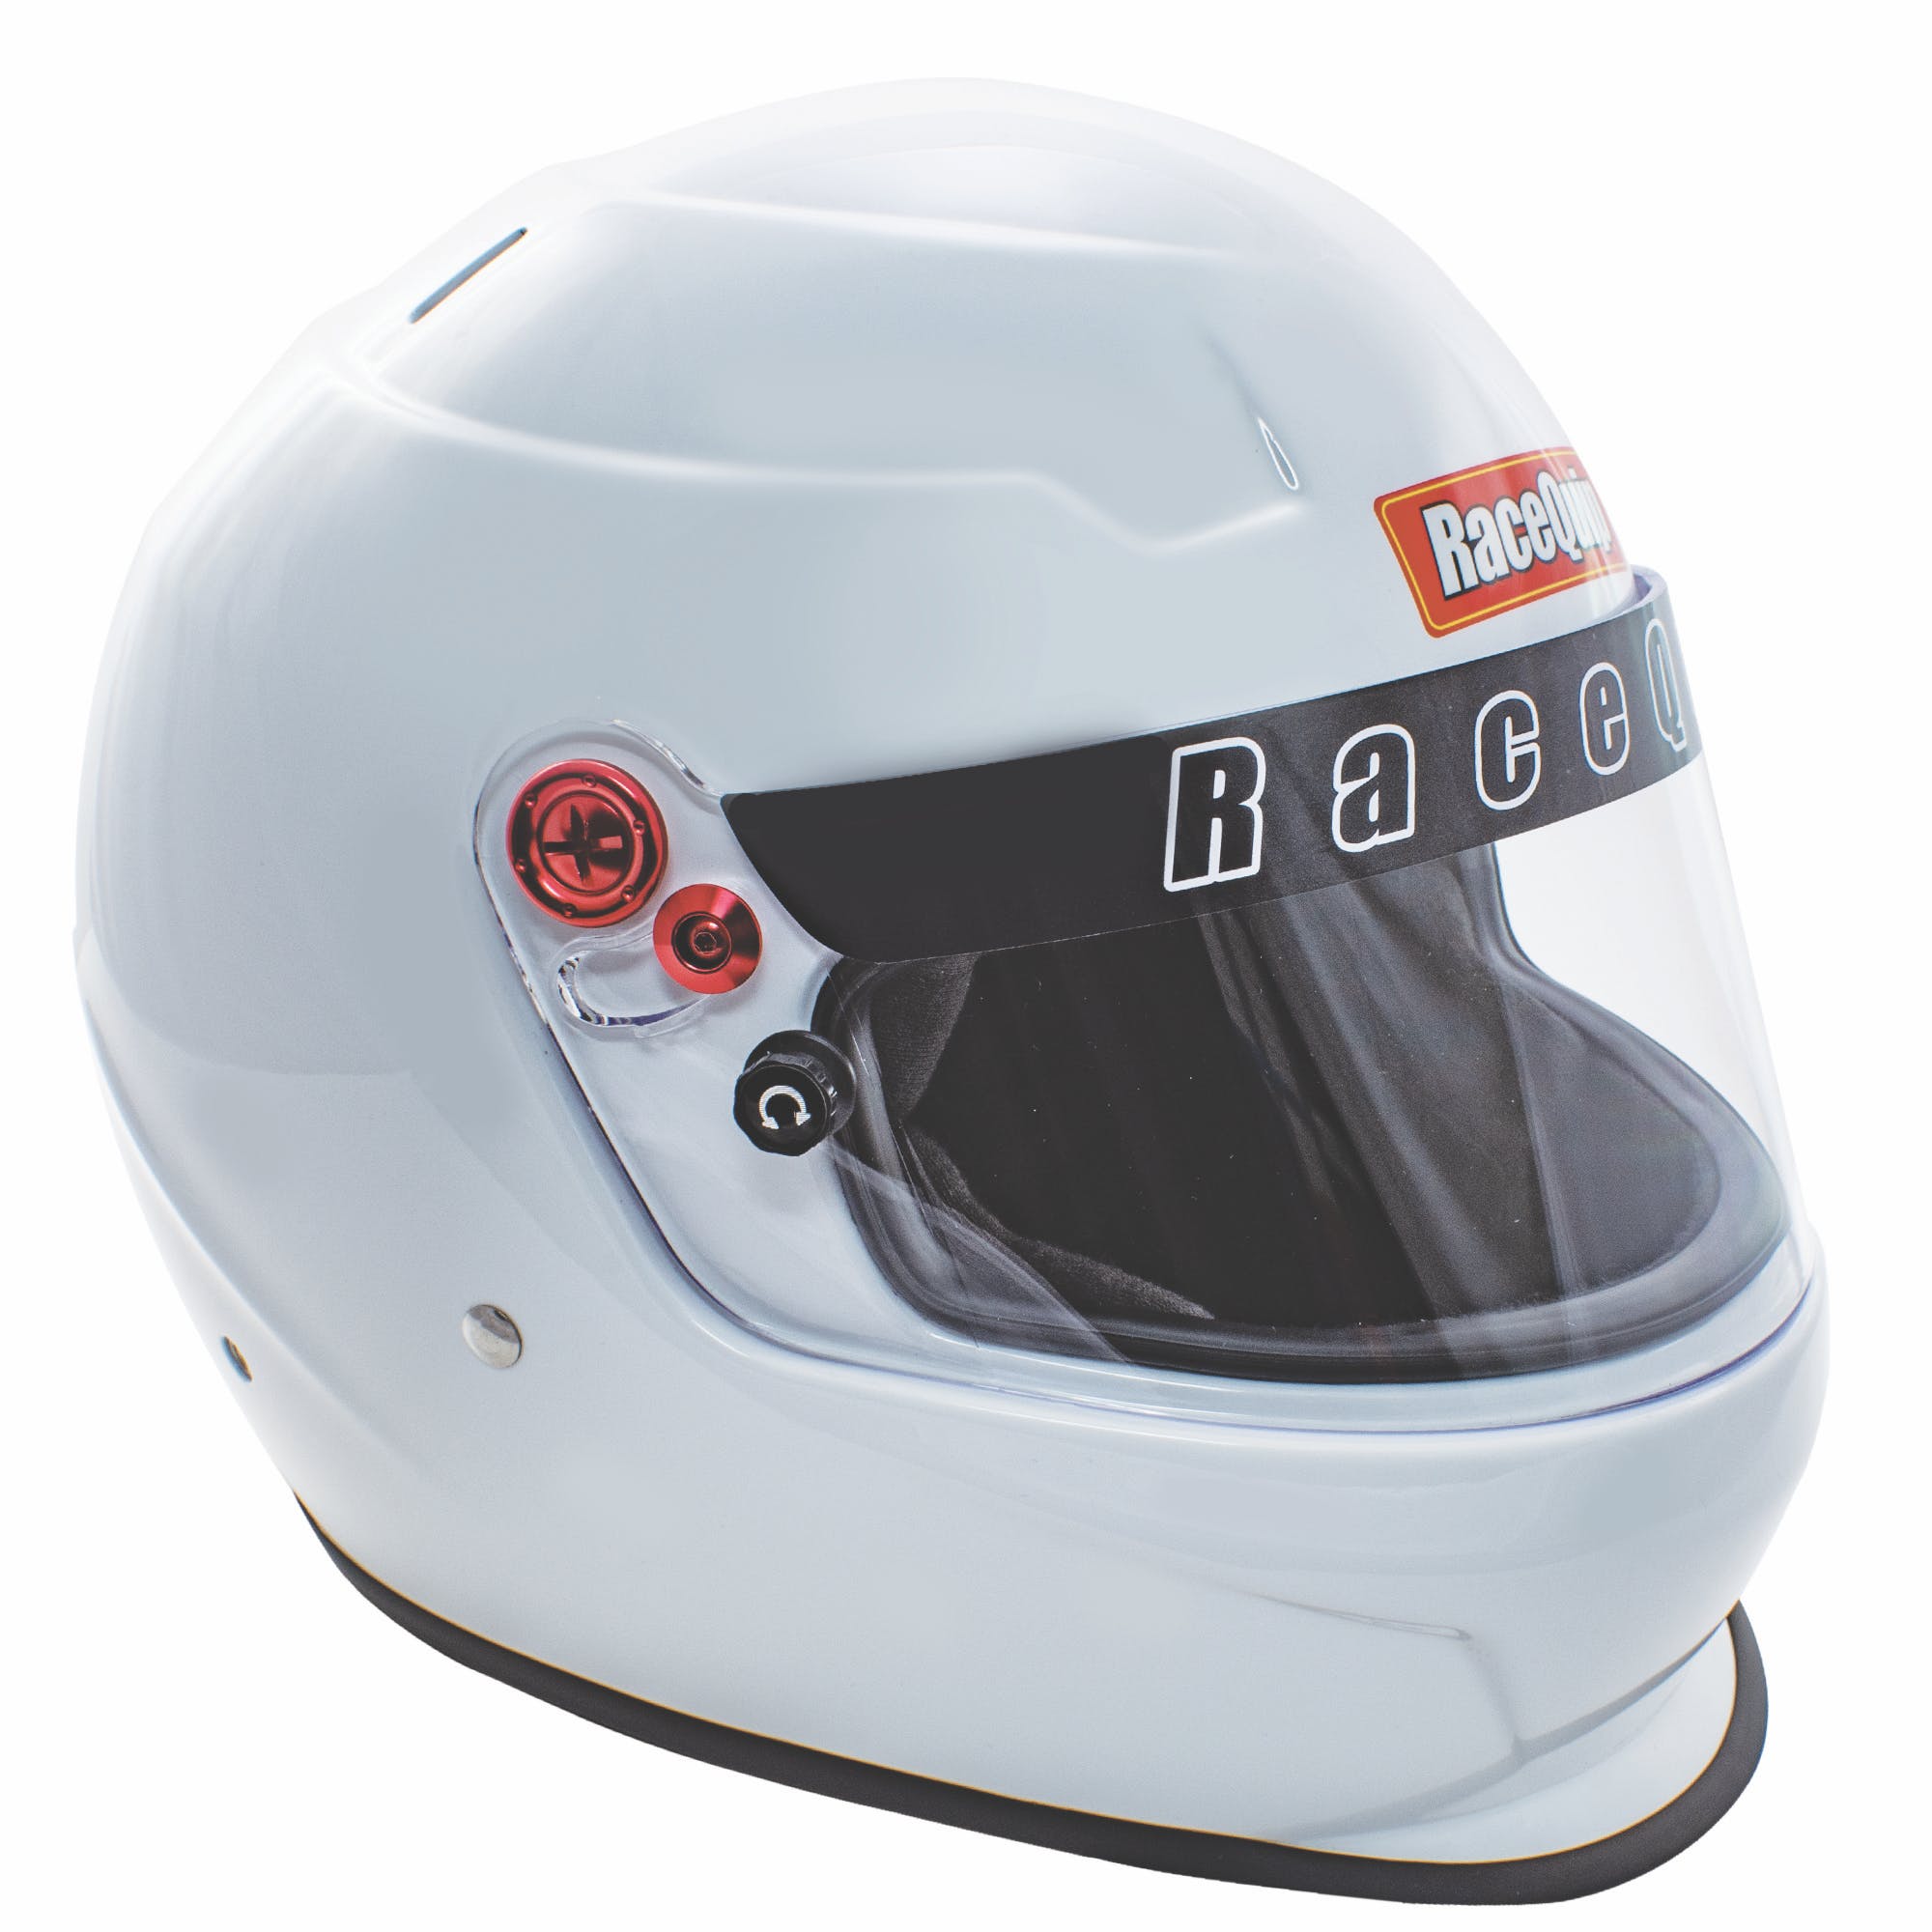 RaceQuip 276110 PRO20 Full Face Helmet Snell SA2020 Rated; Gloss White XX-Small